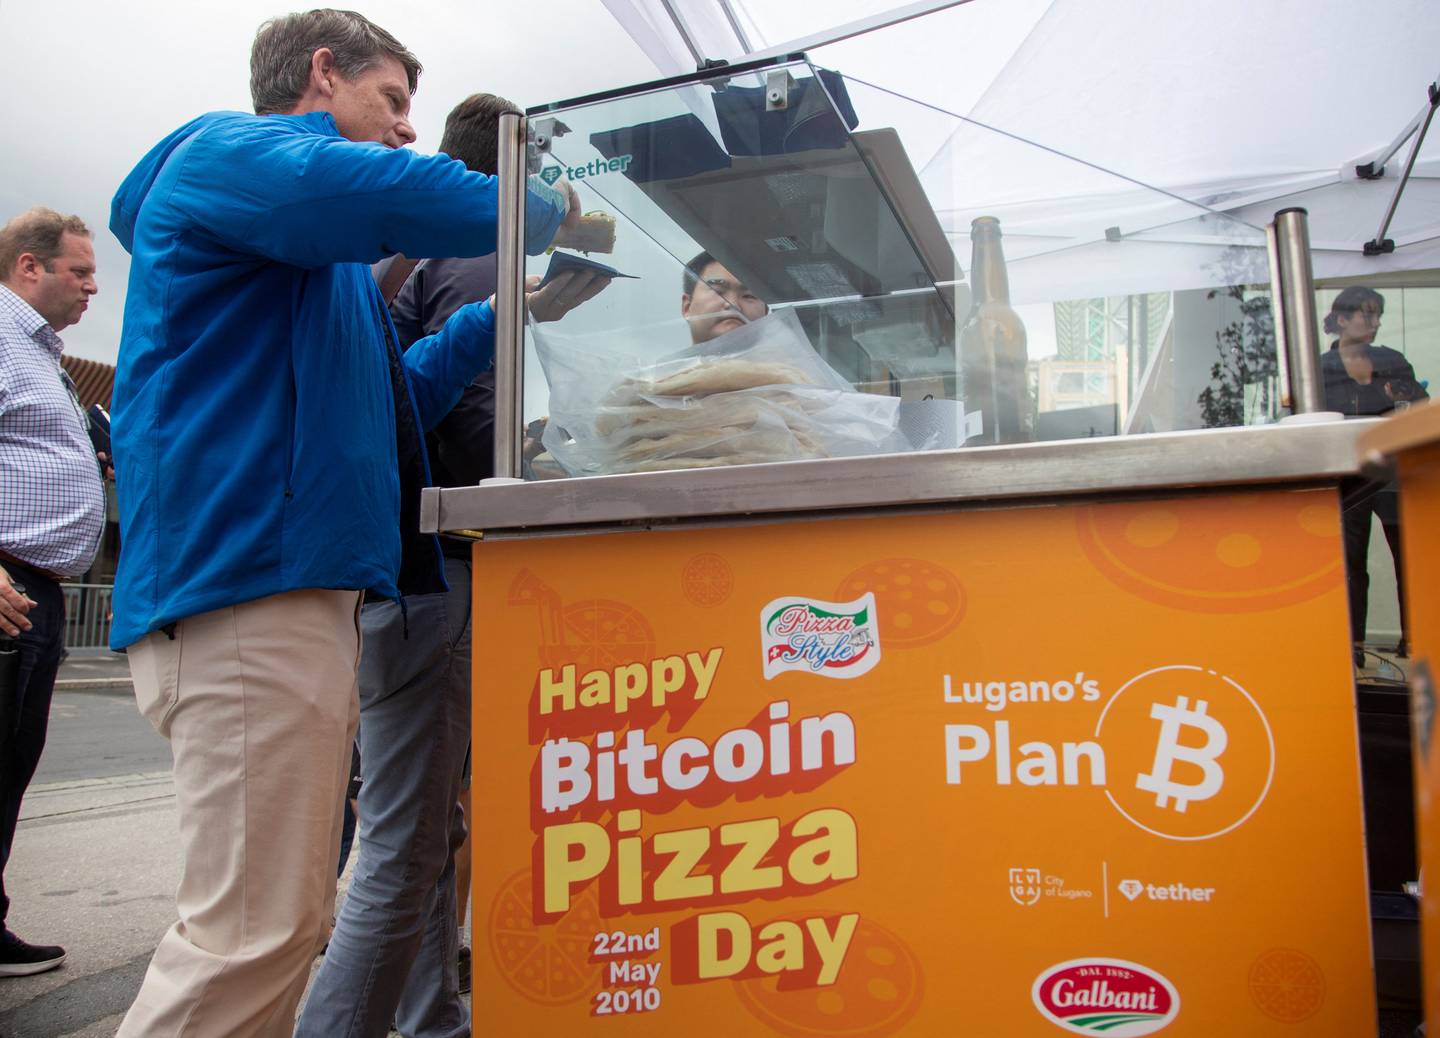 Free pizza is offered during the "Happy Bitcoin Pizza Day" ahead of the World Economic Forum (WEF) in Davos, Switzerland, May 22, 2022.  Picture taken May 22, 2022.      REUTERS / Arnd Wiegmann